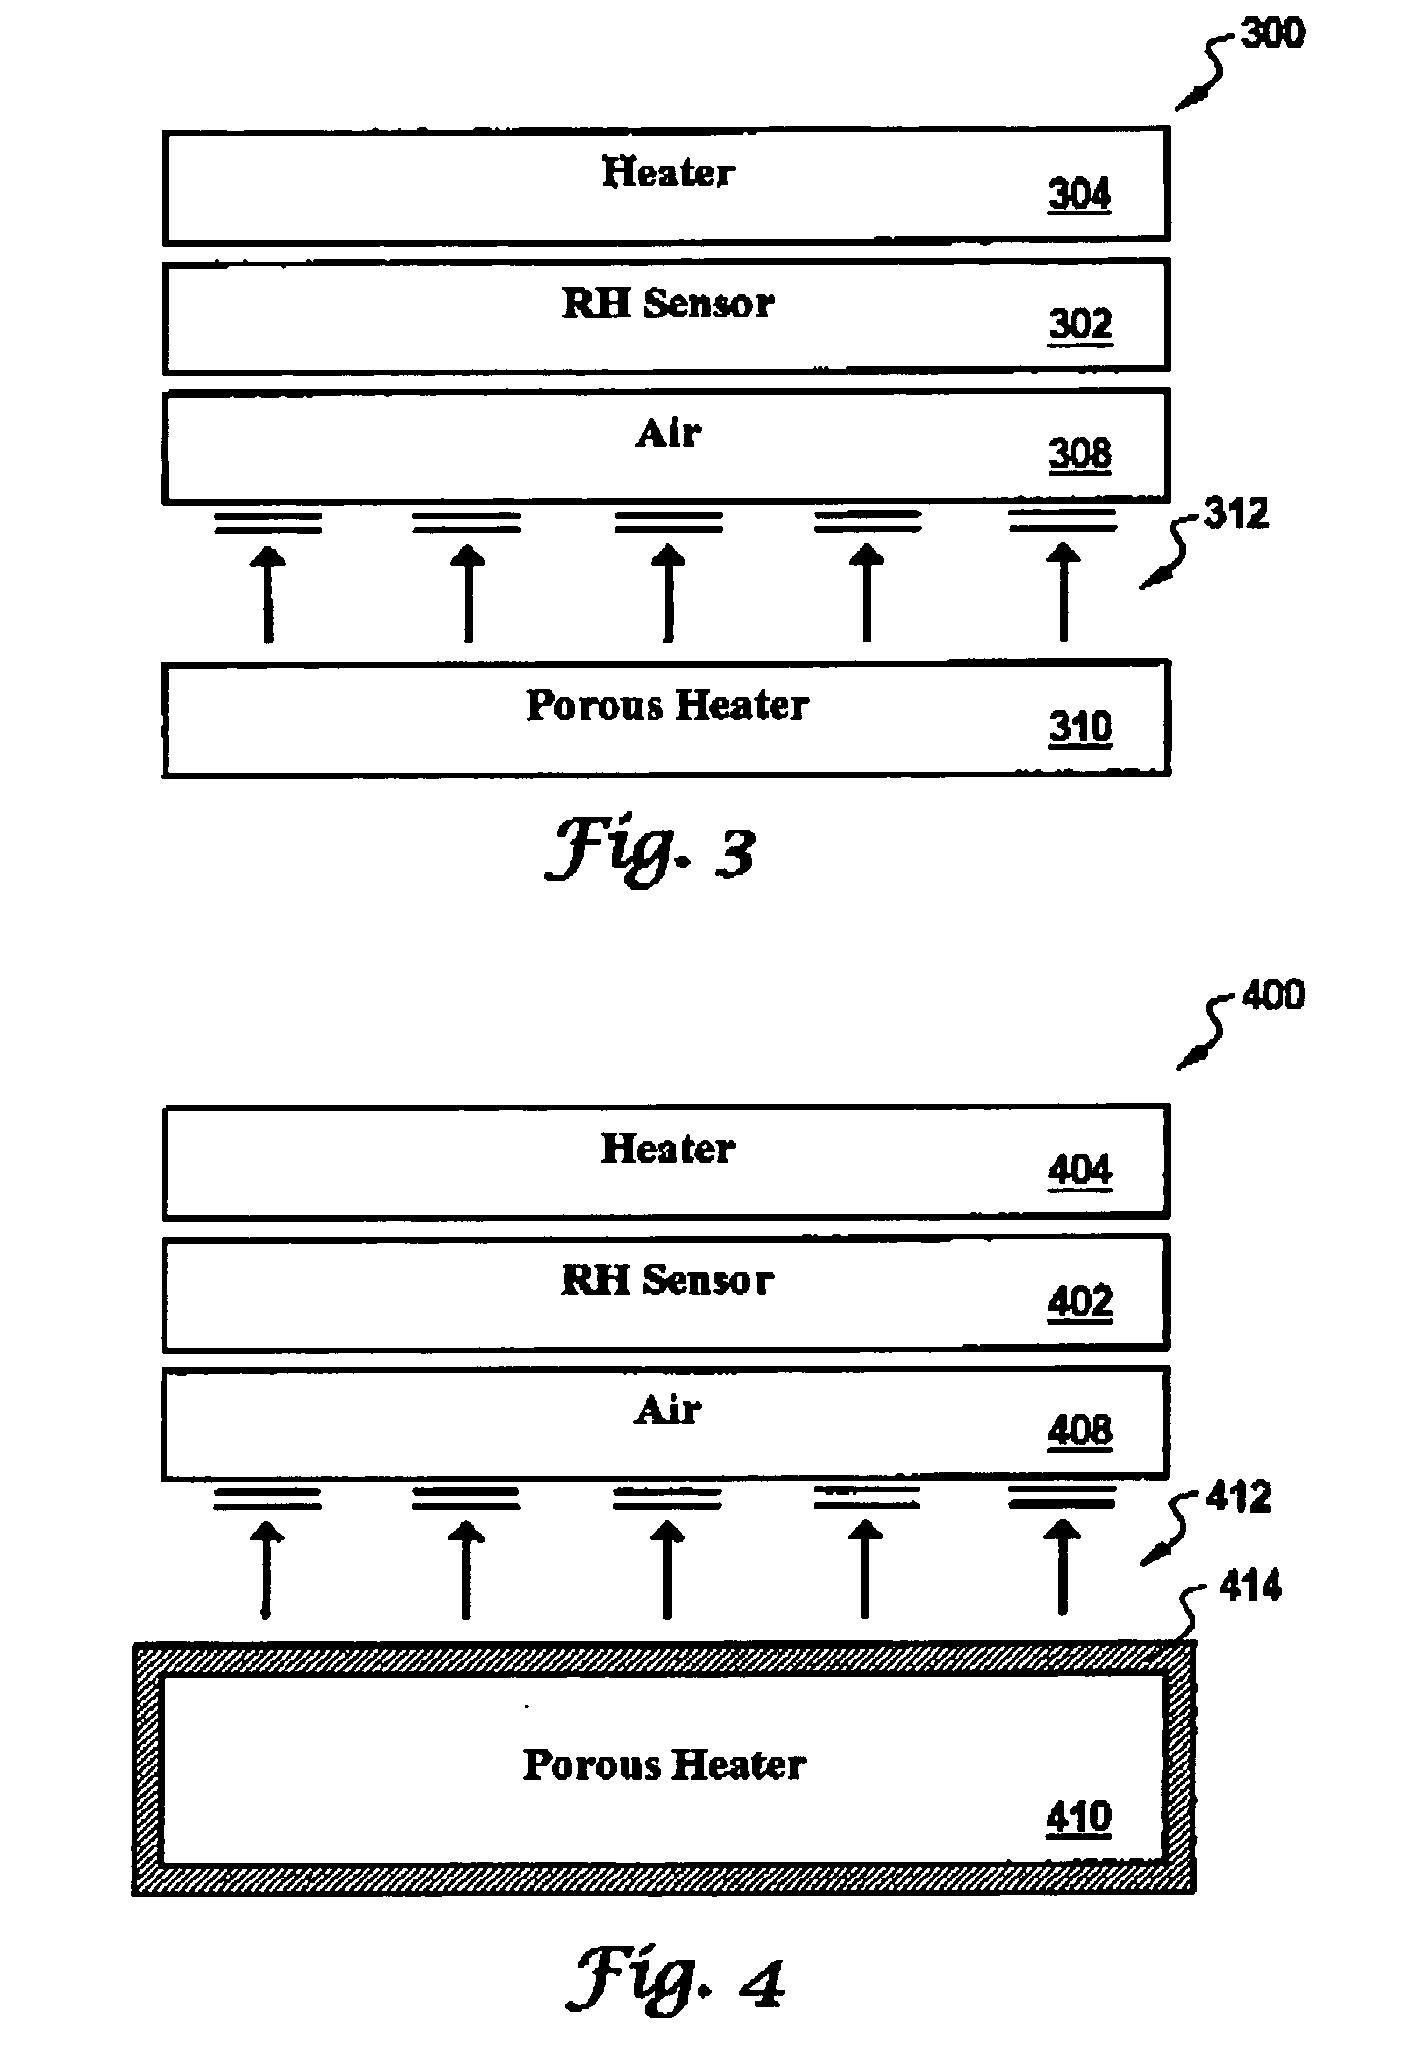 Relative humidity sensor enclosed with formed heating element